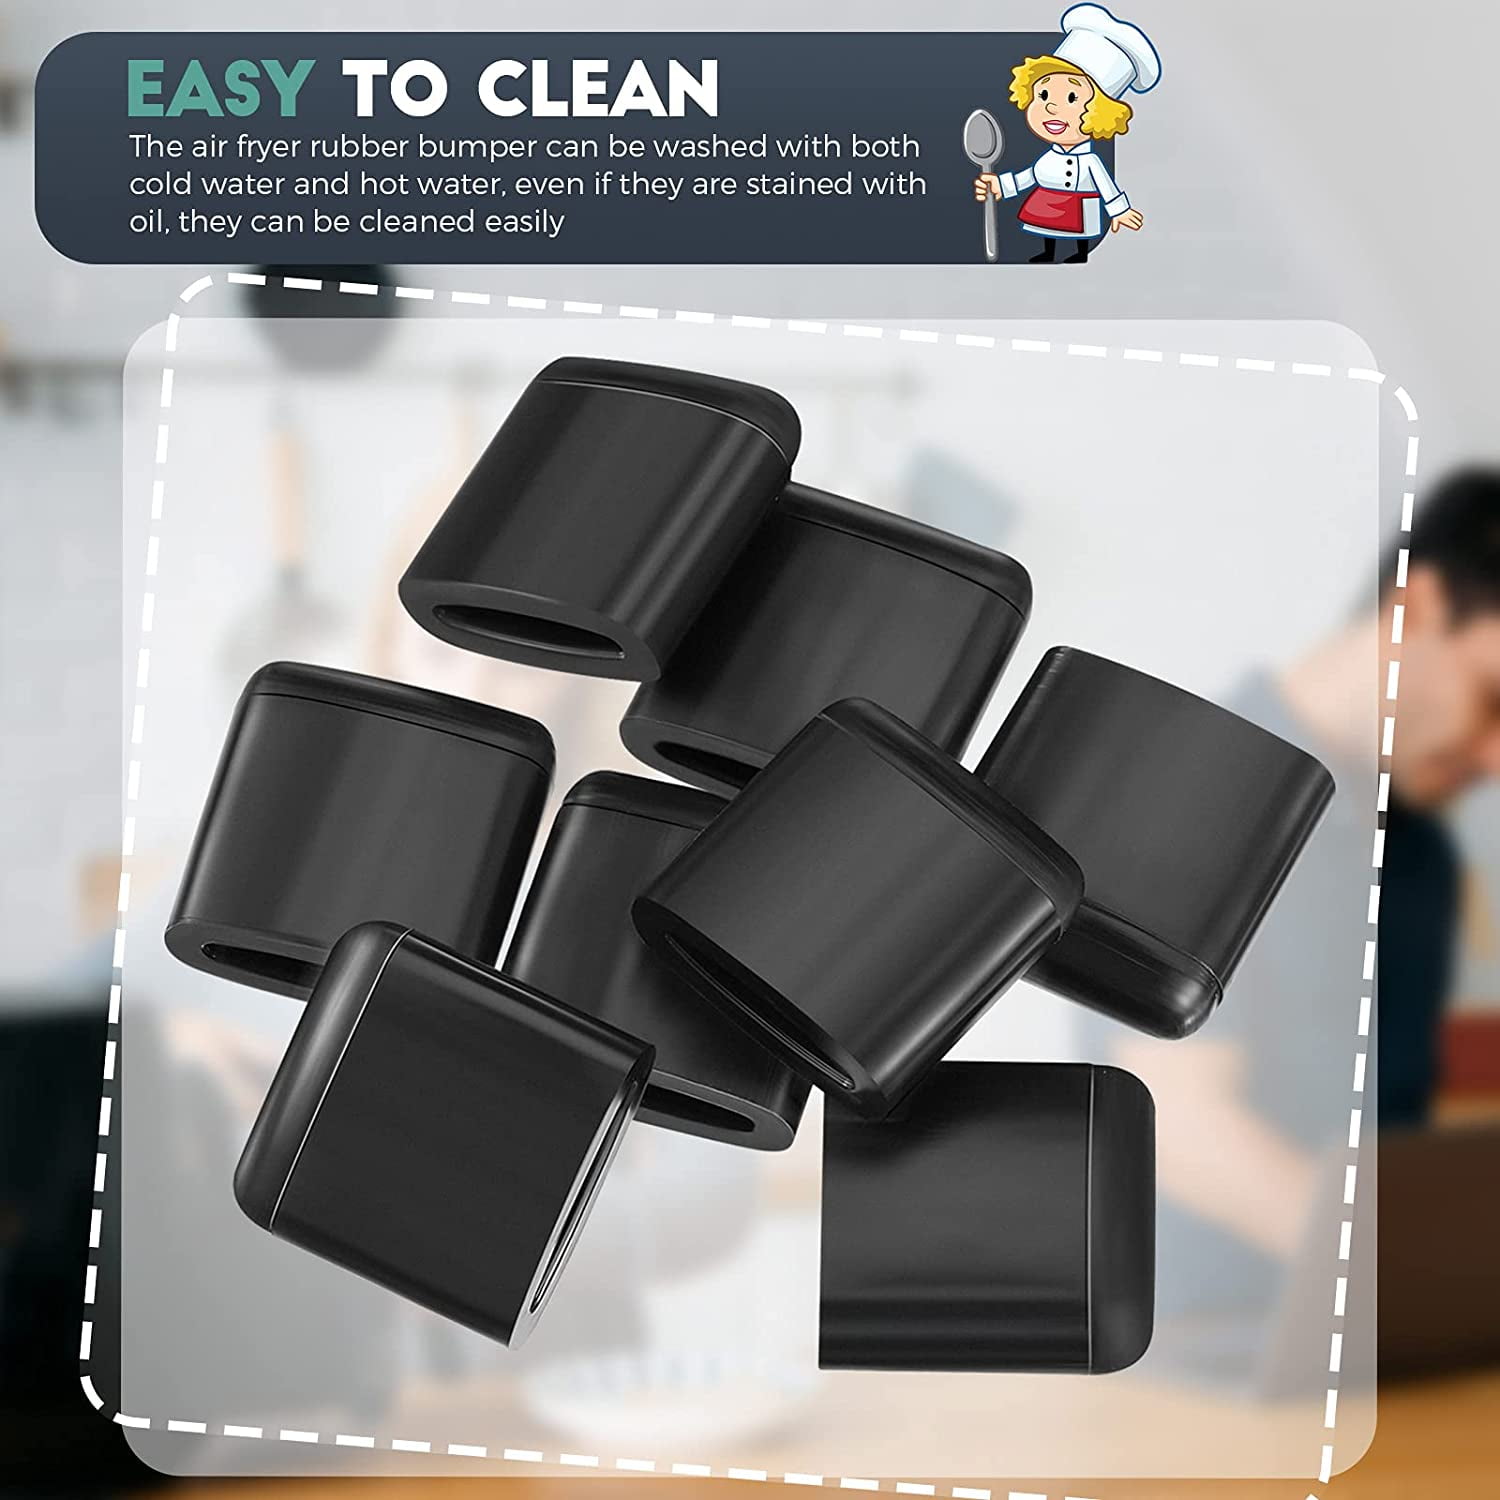 UNIVERSAL AIR FRYER Bumpers Protector Pan Protective Covers Kitchen $3.22 -  PicClick AU